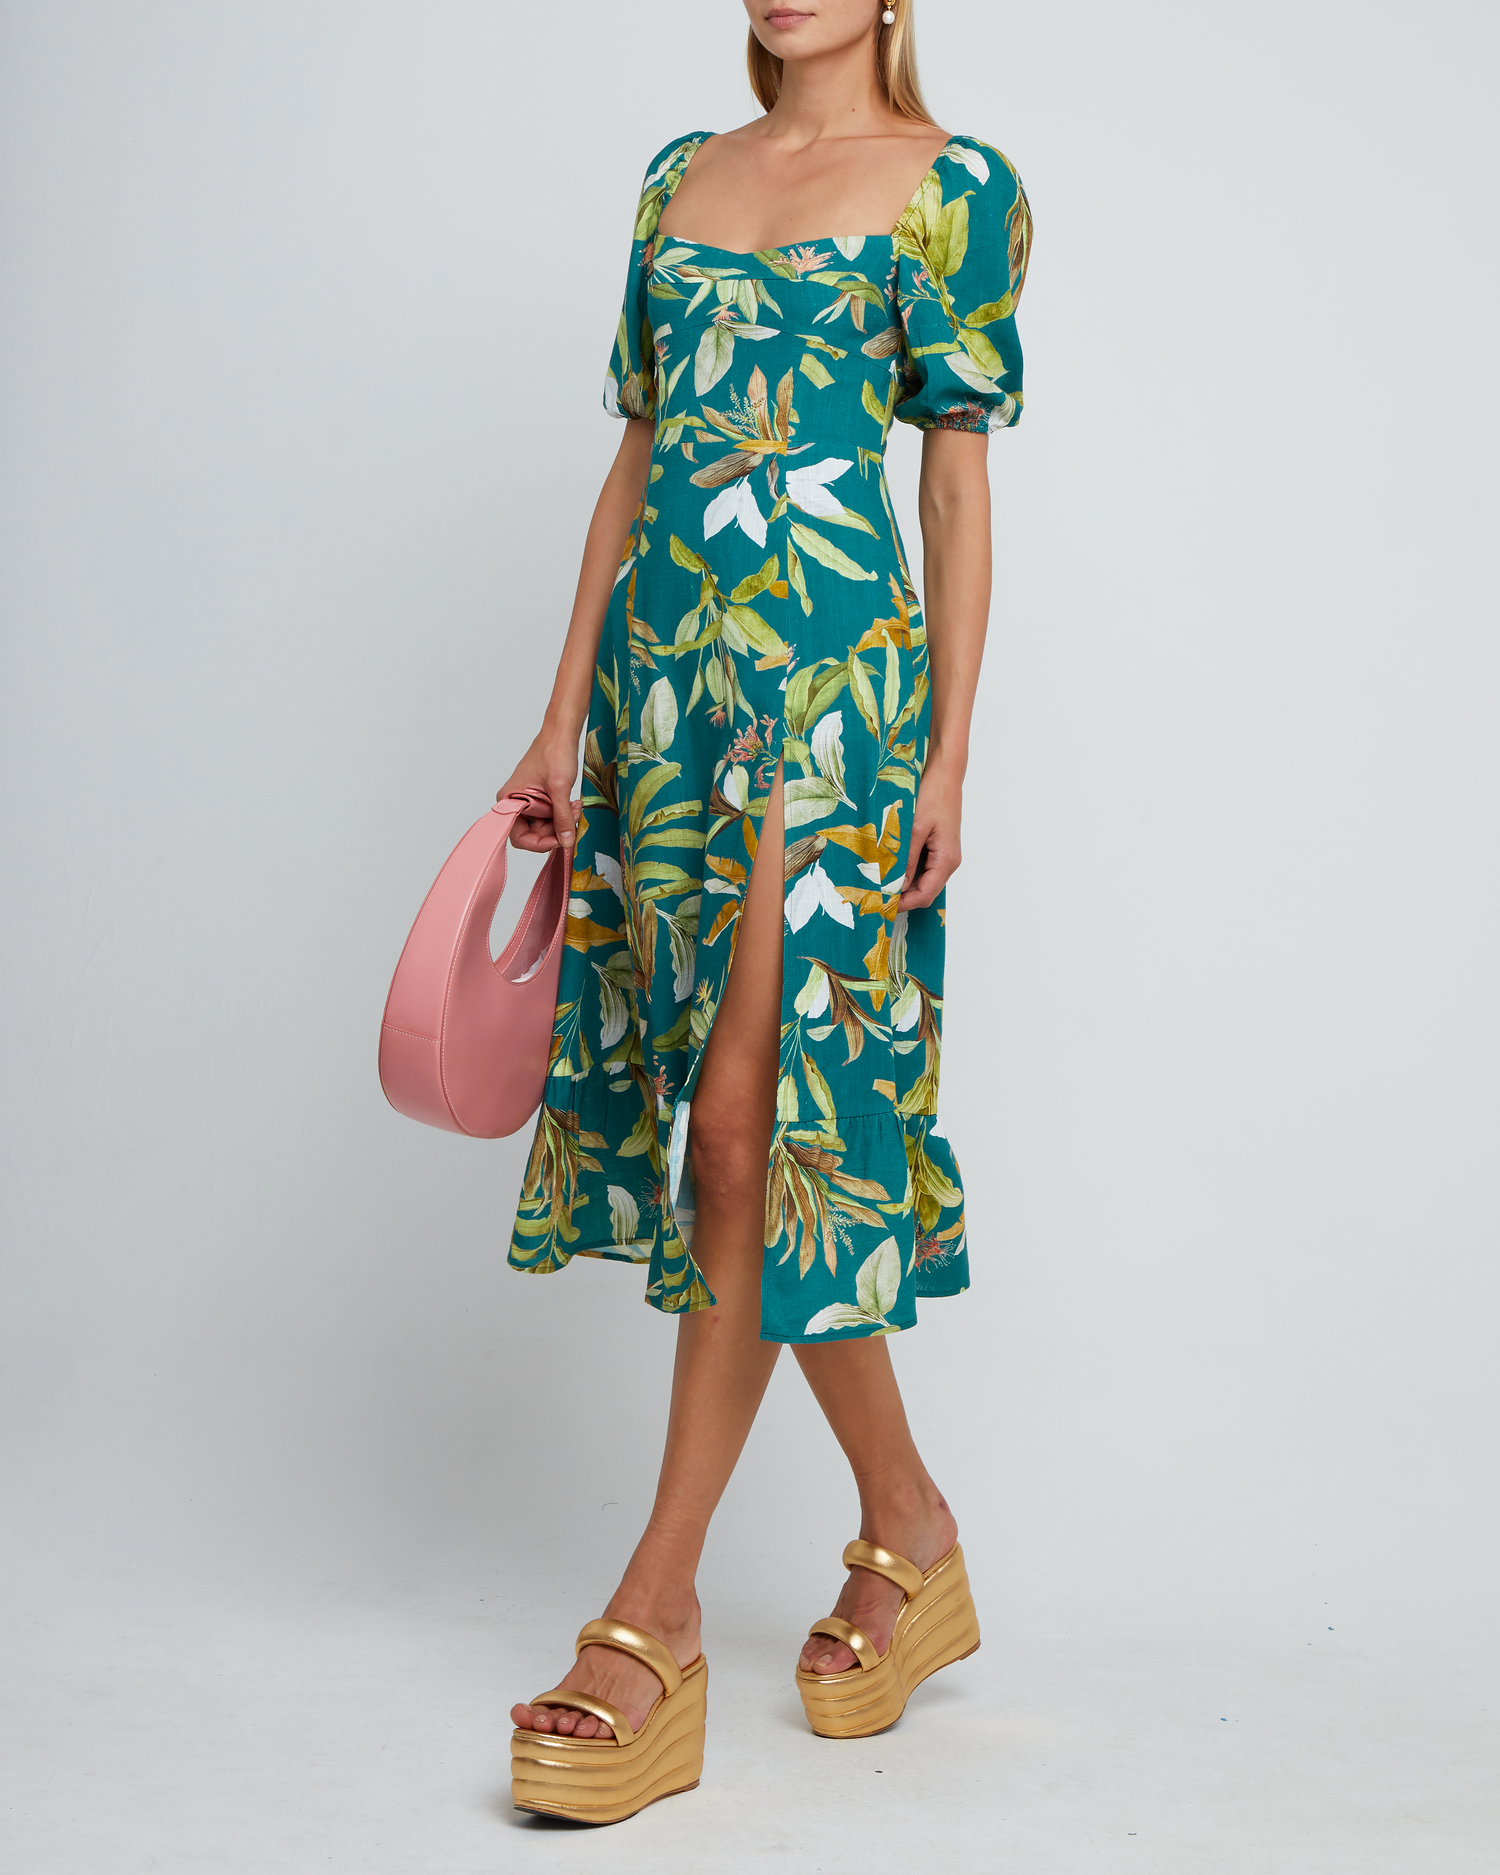 Fourth image of Violetta Midi Dress, a green midi dress, sweetheart neckline, short sleeves, puff sleeves, side slit, tropical print, floral